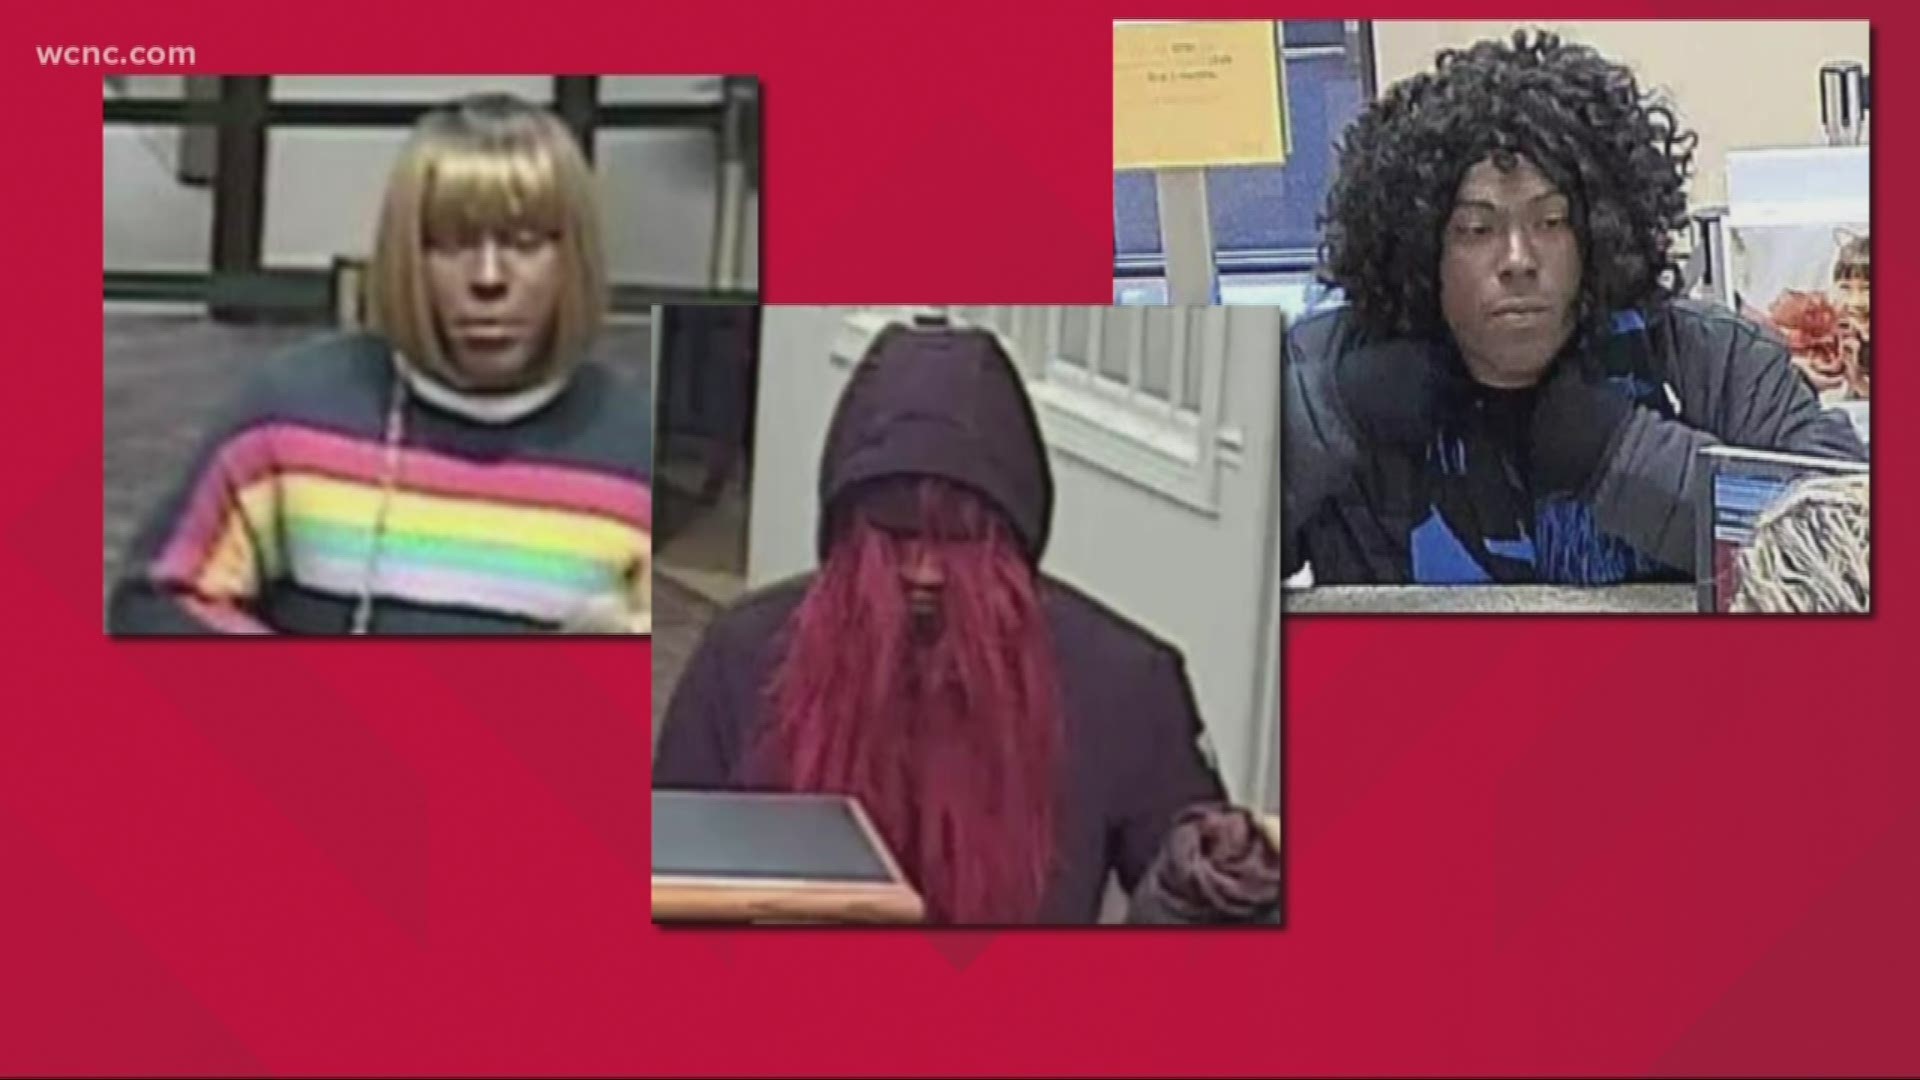 The suspect has been captured wearing a variety of wigs while committing bank robberies near Charlotte.